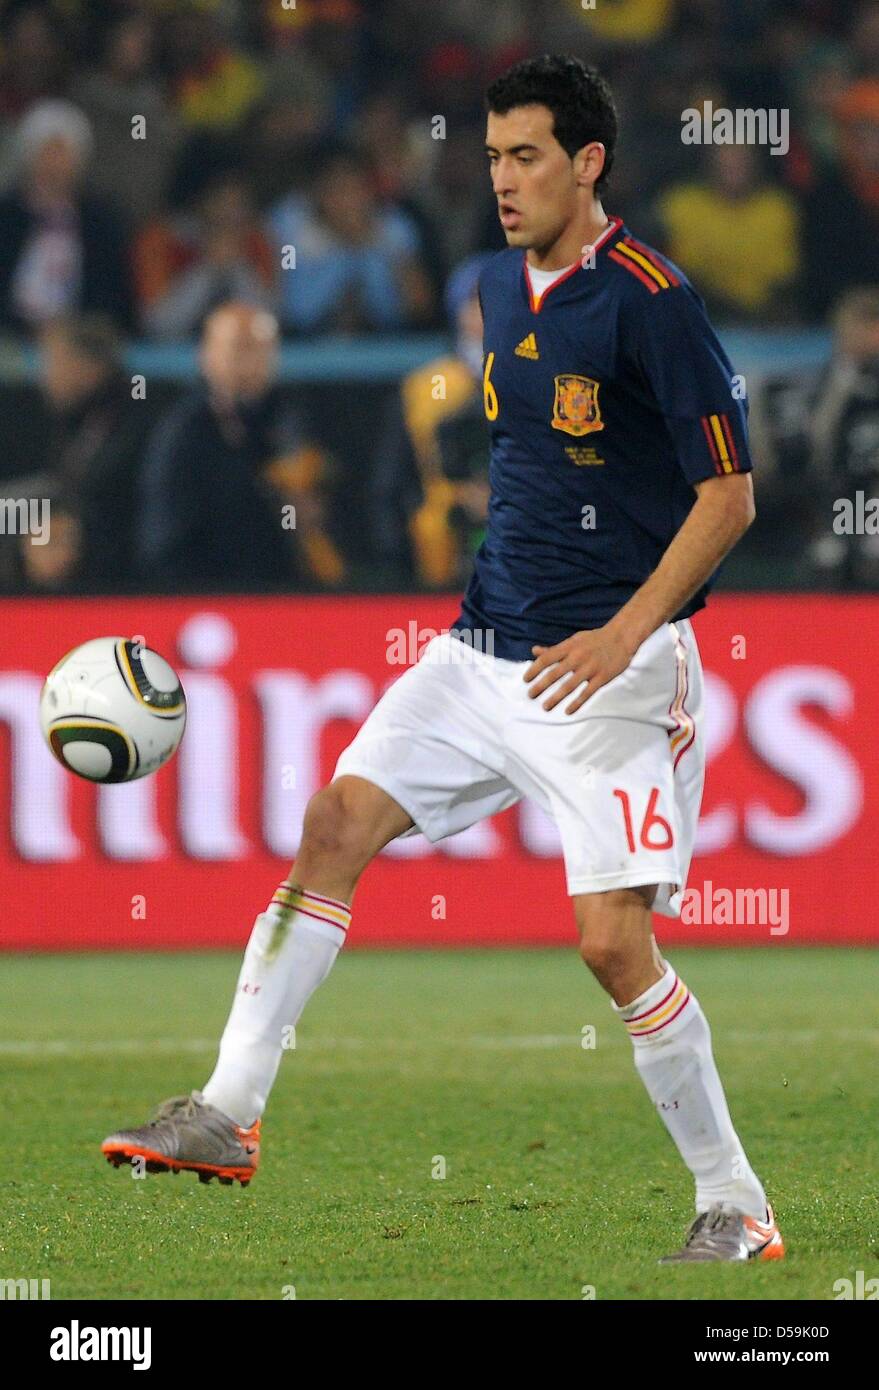 Spain's Sergio Busquets during the 2010 FIFA World Cup group H match between Chile and Spain at Loftus Versfeld Stadium in Pretoria, South Africa 25 June 2010. Photo: Marcus Brandt dpa - Please refer to http://dpaq.de/FIFA-WM2010-TC Stock Photo